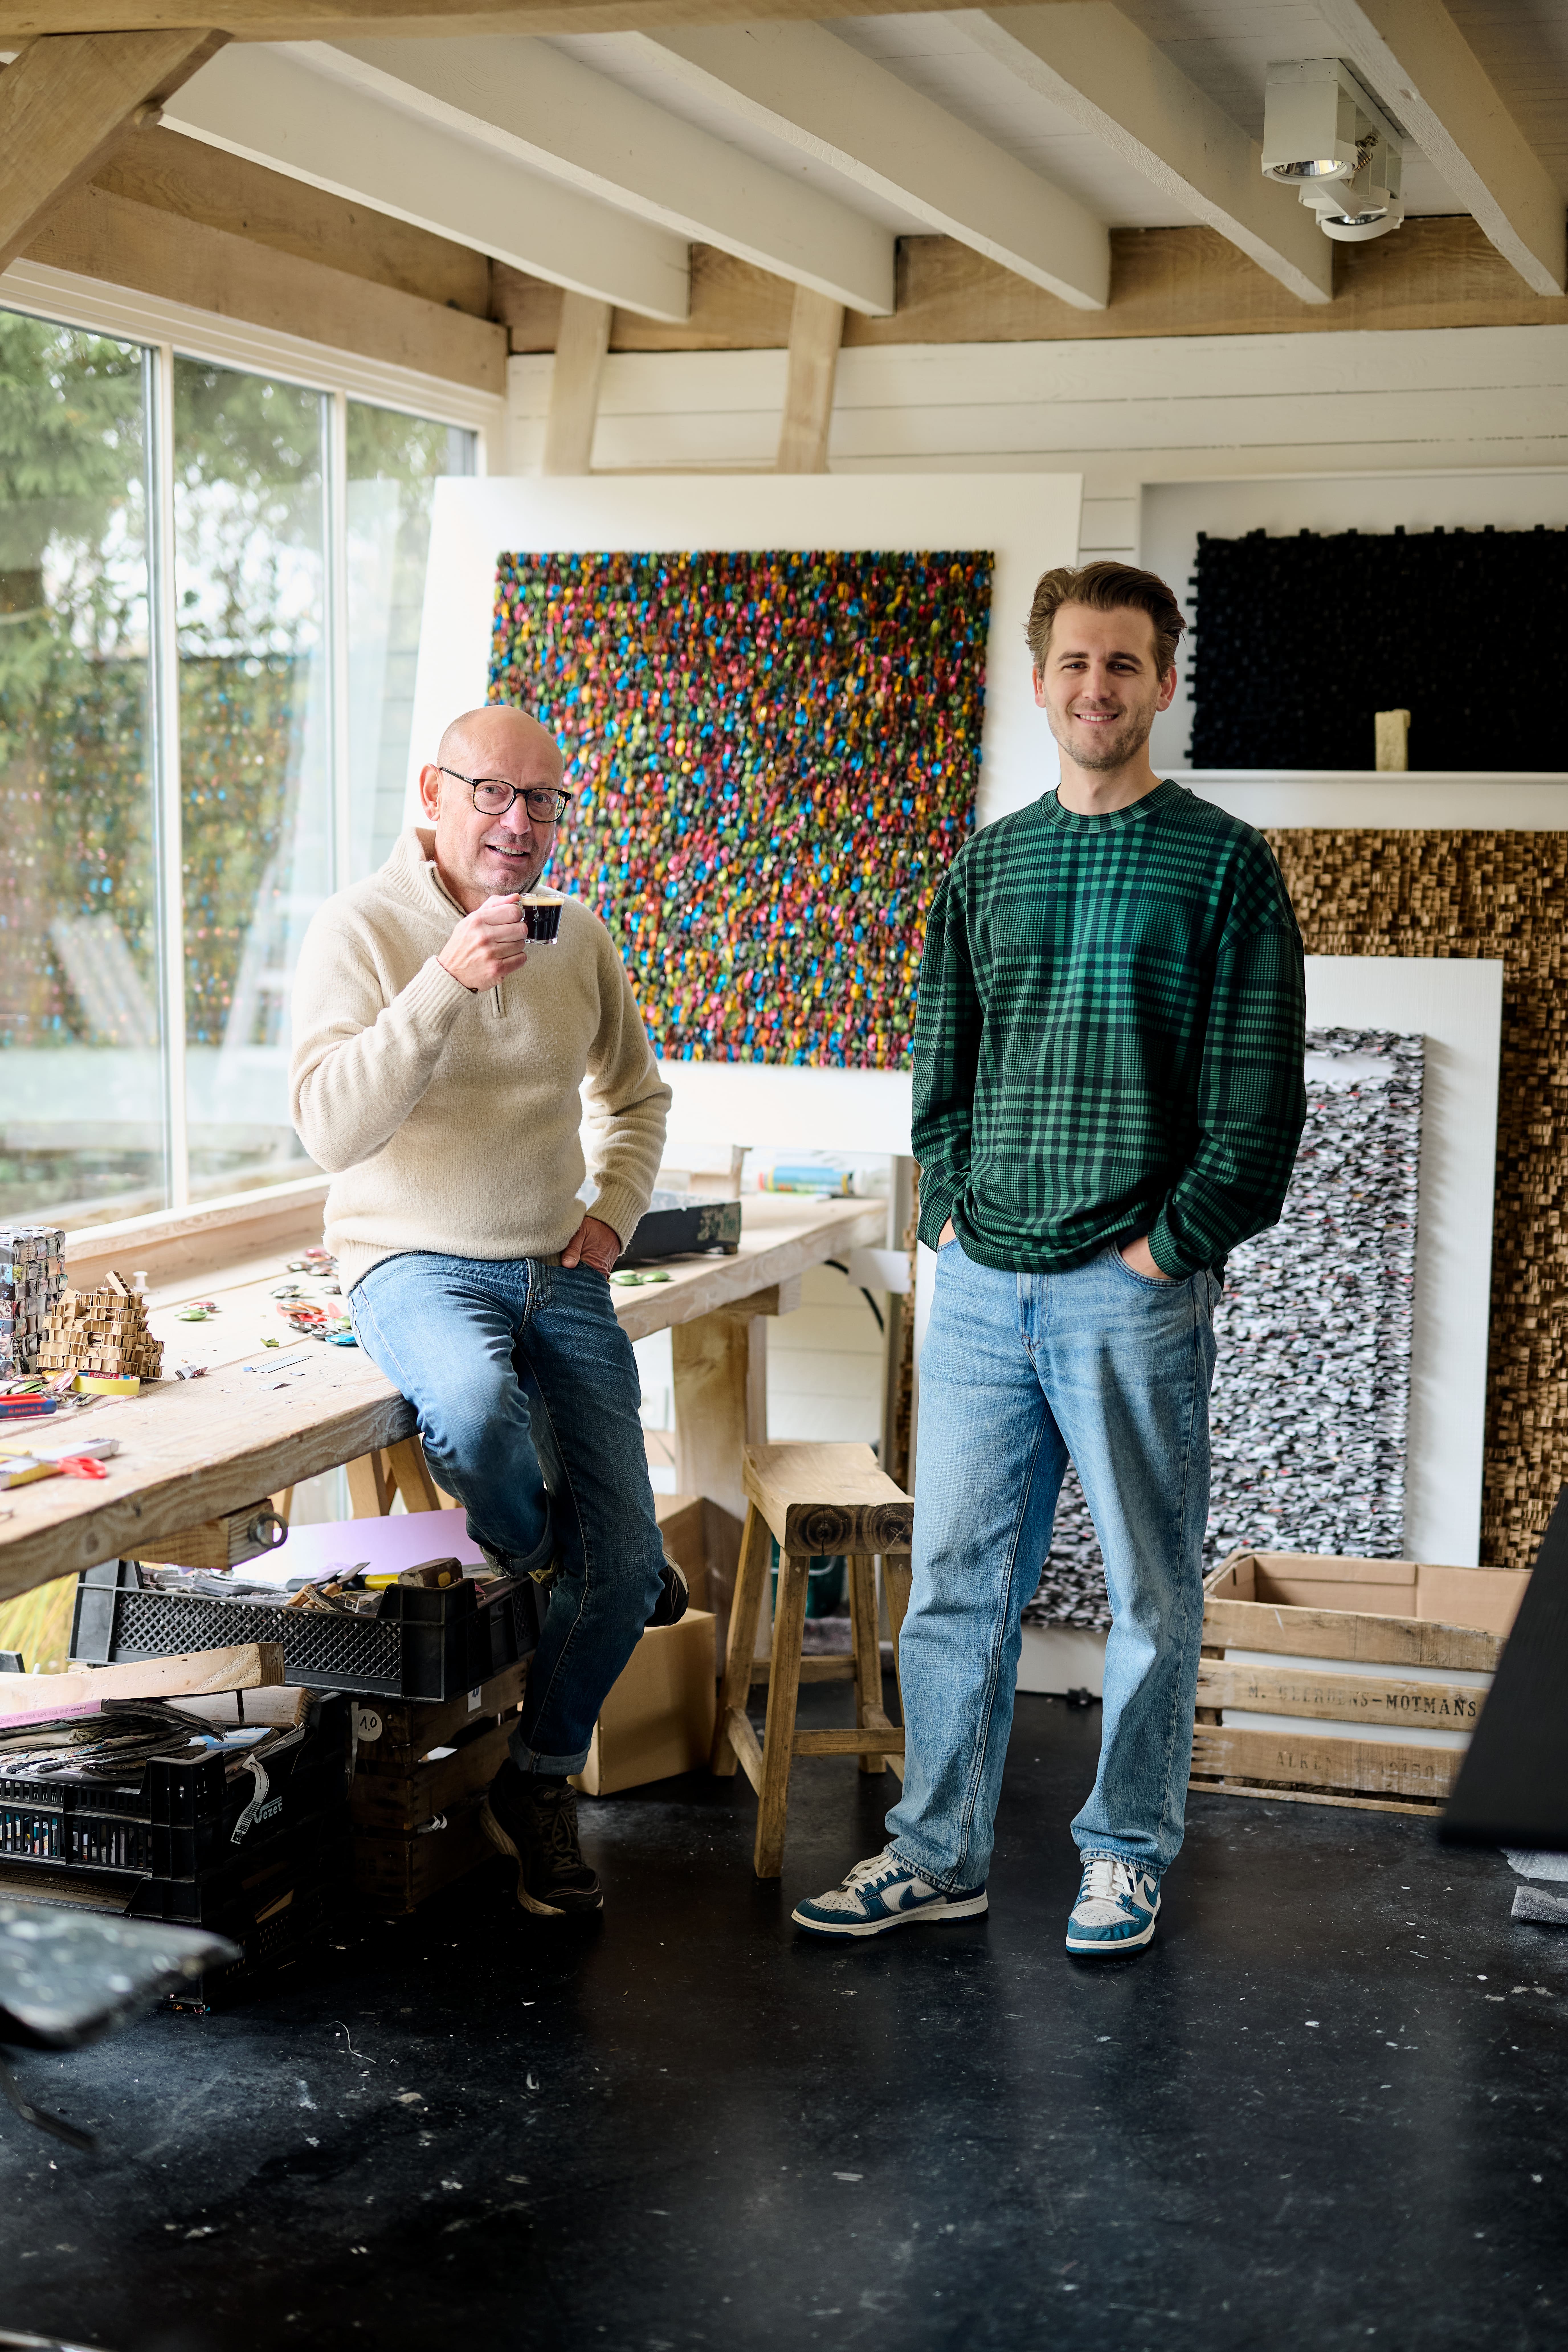 Lucas De Dycker and Guy Leclef in his studio for Nespresso Forwart Gallery and Advisory by David Plas